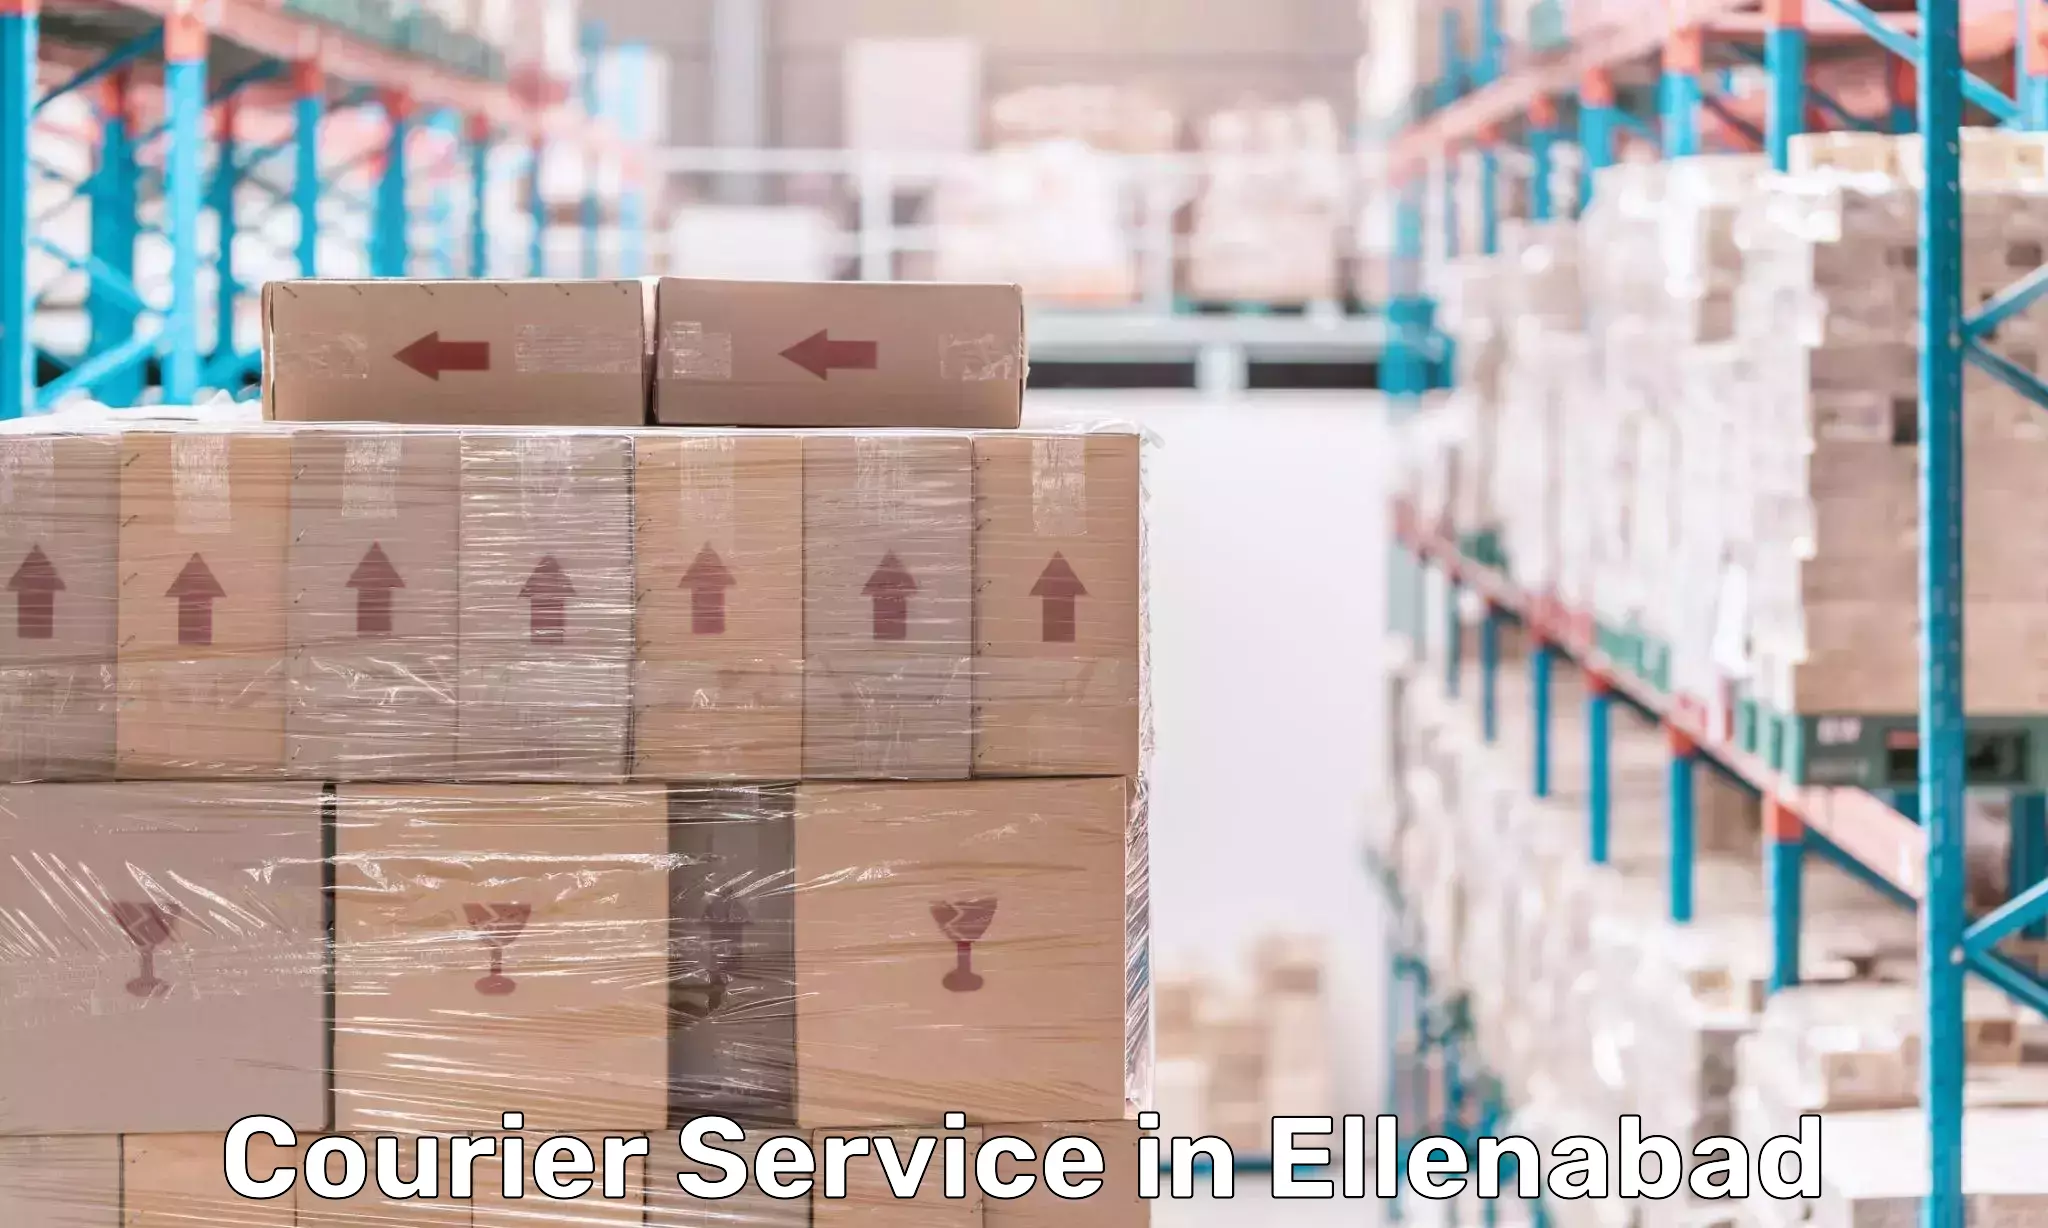 Sustainable shipping practices in Ellenabad